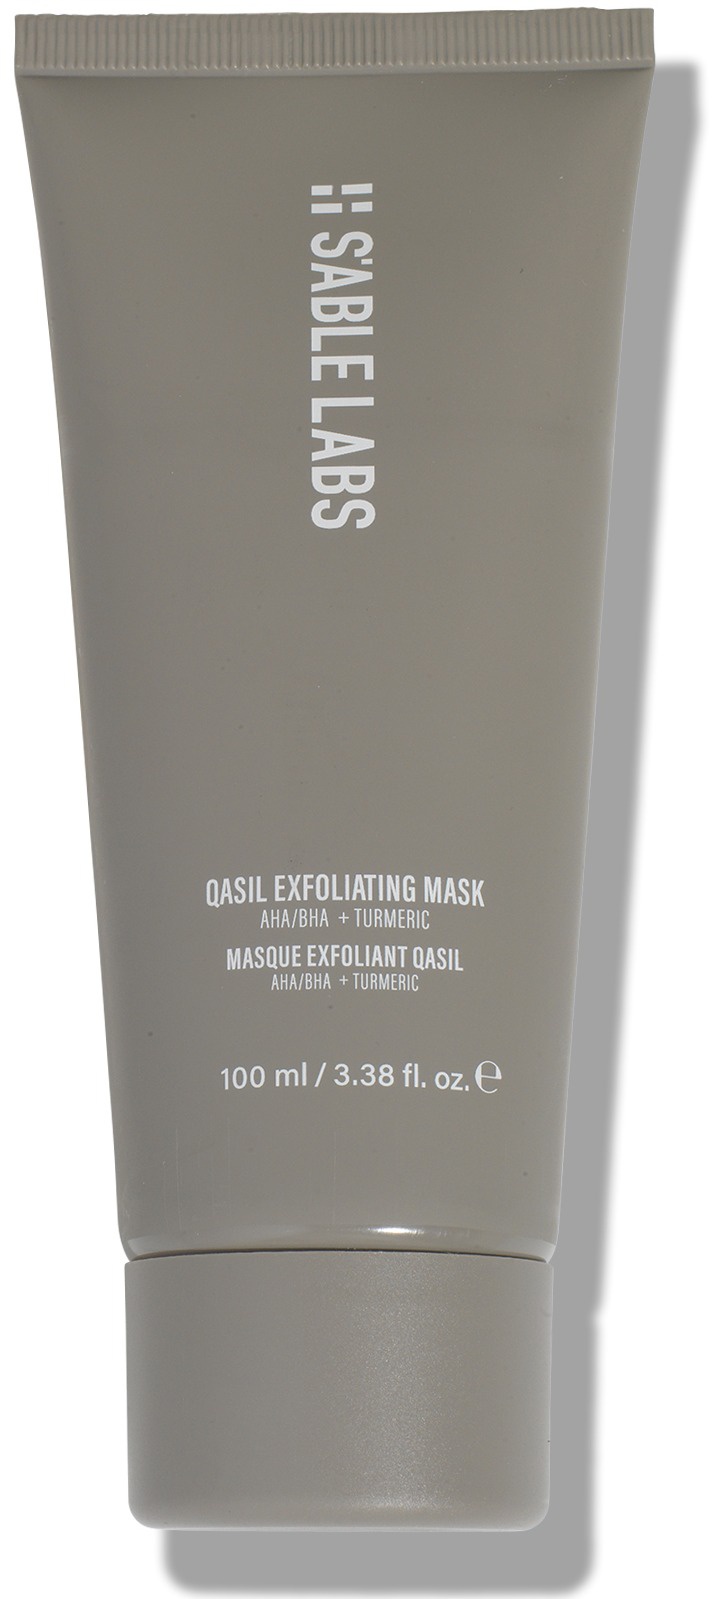 S’Able Labs Qasil Exfoliating Mask